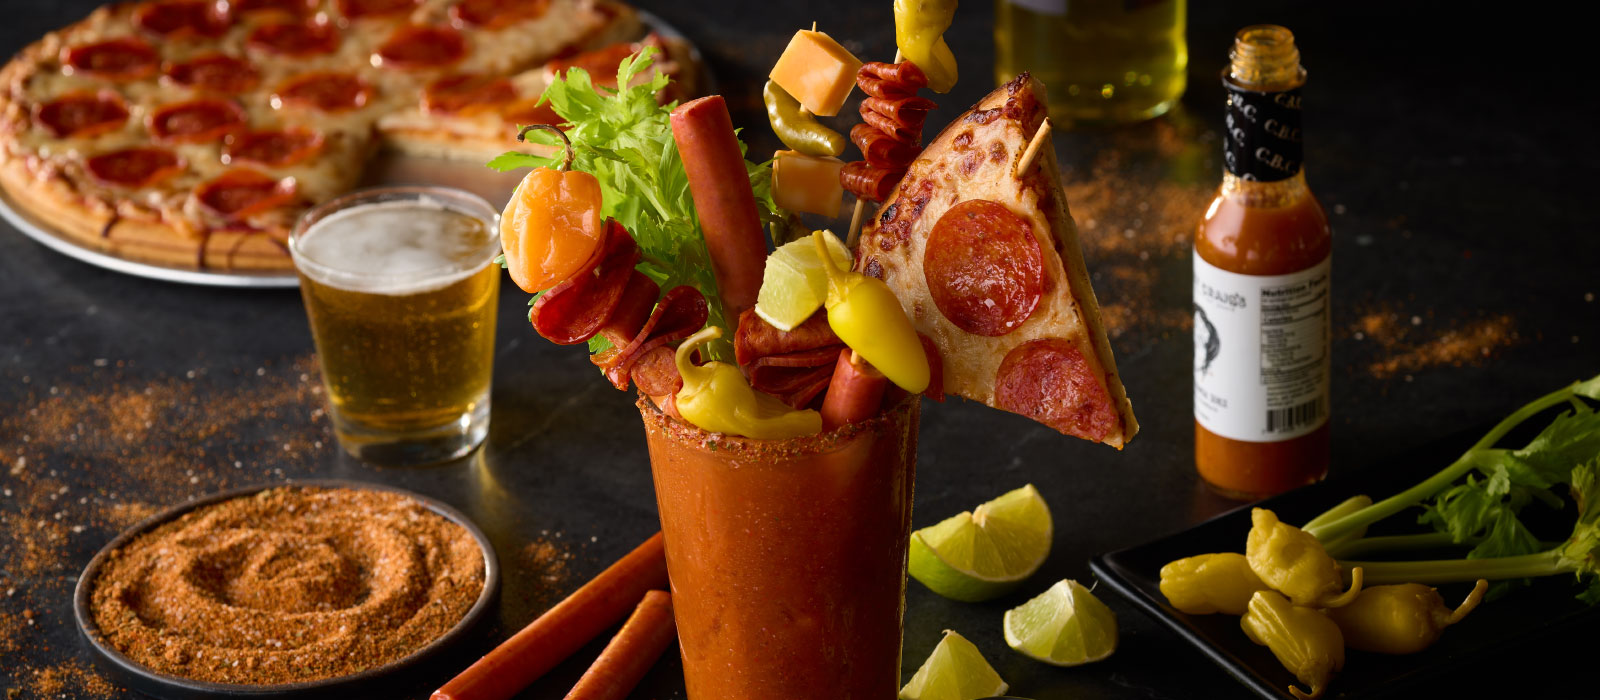 MAKING SPIRITS BRIGHT THIS HOLIDAY SEASON WITH AN ALL-NEW ULTIMATE PEPPERONI BLOODY MARY COCKTAIL KIT